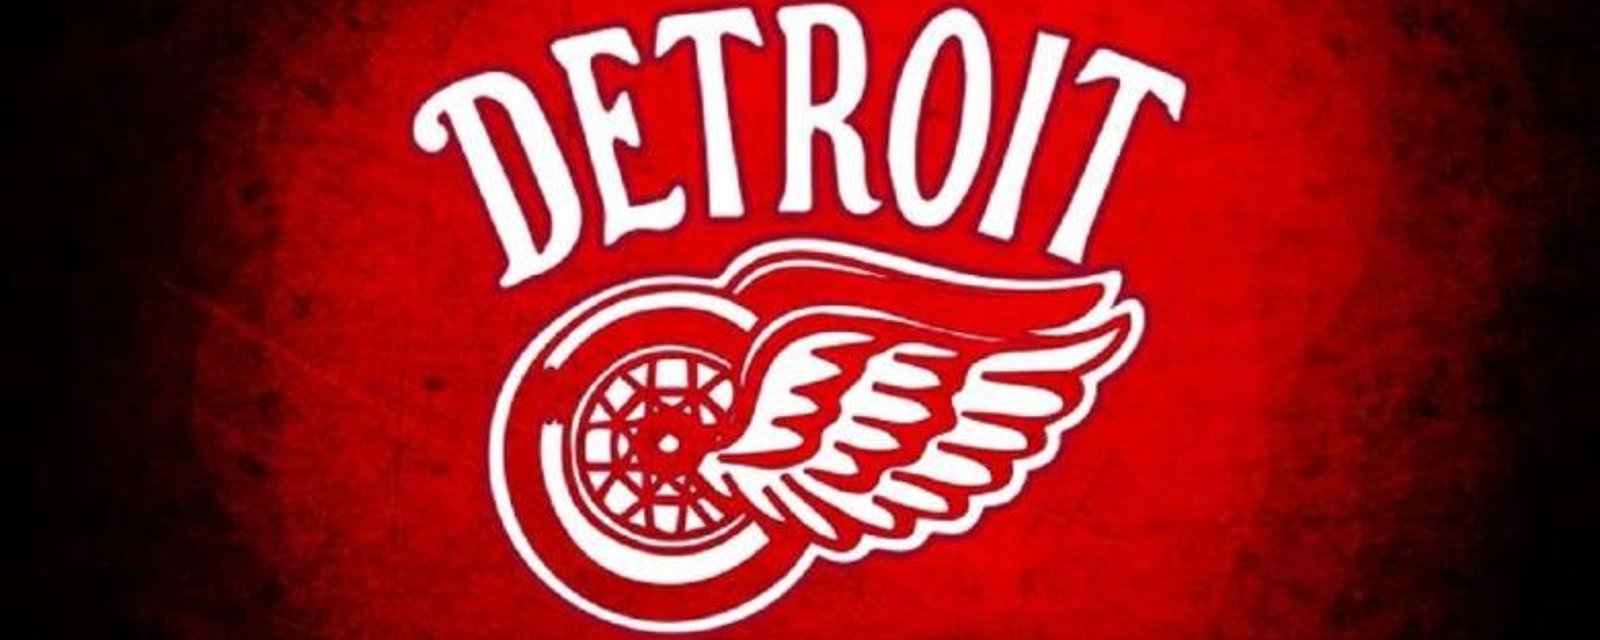 Detroit's big win helps them move up the standings!